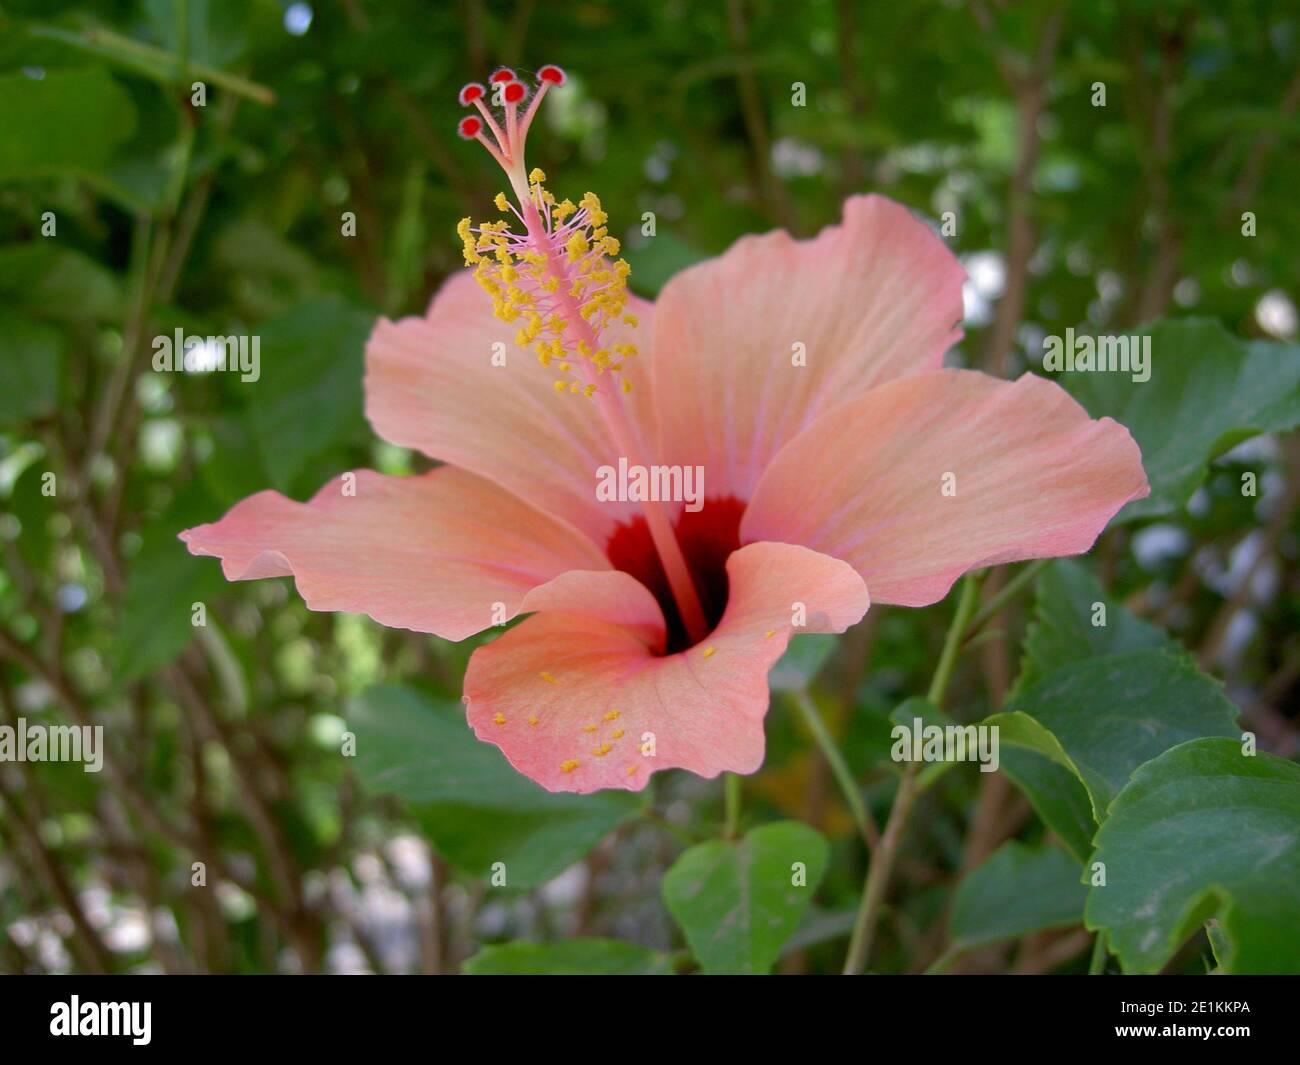 Hibiscus, a large beautiful flower, is a member of the mallow family Malvaceae. It is a hardy plant, likes warm climates and is easy to grow. Stock Photo